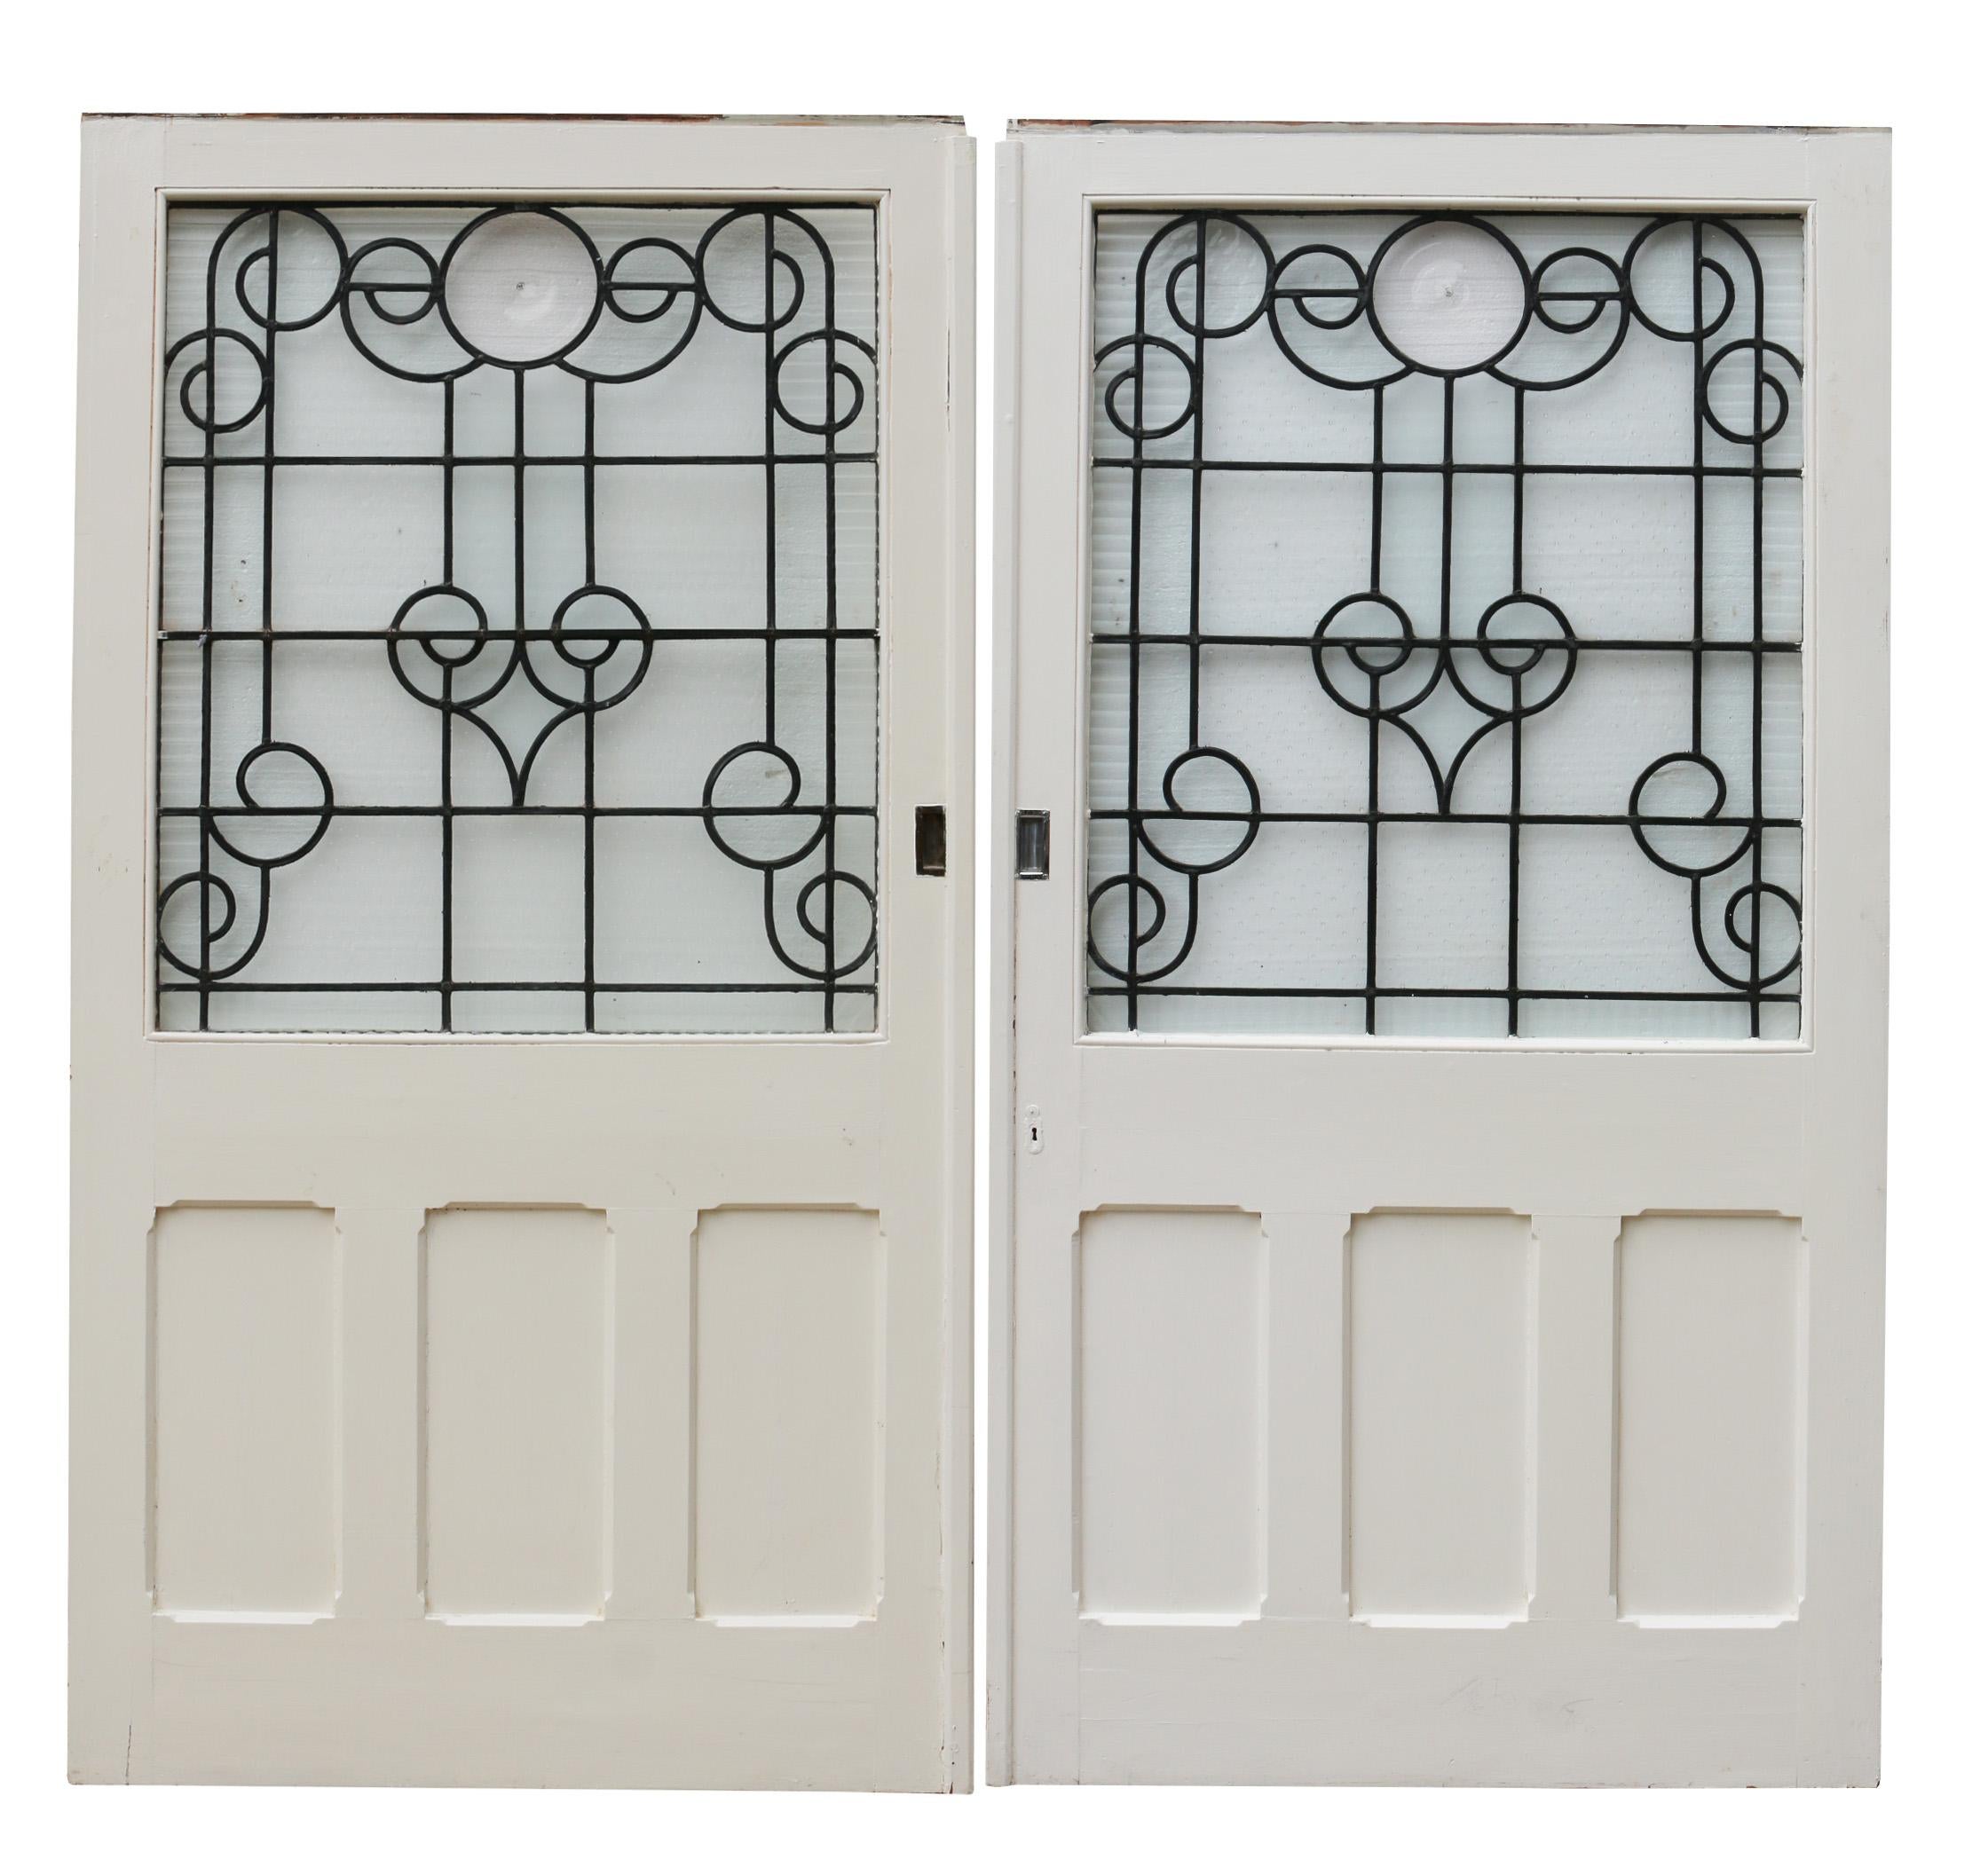 These have previously been used as sliding doors, they could however be fitted with butt hinges. The glazing is a mixture of clear, obscured and textured glass.